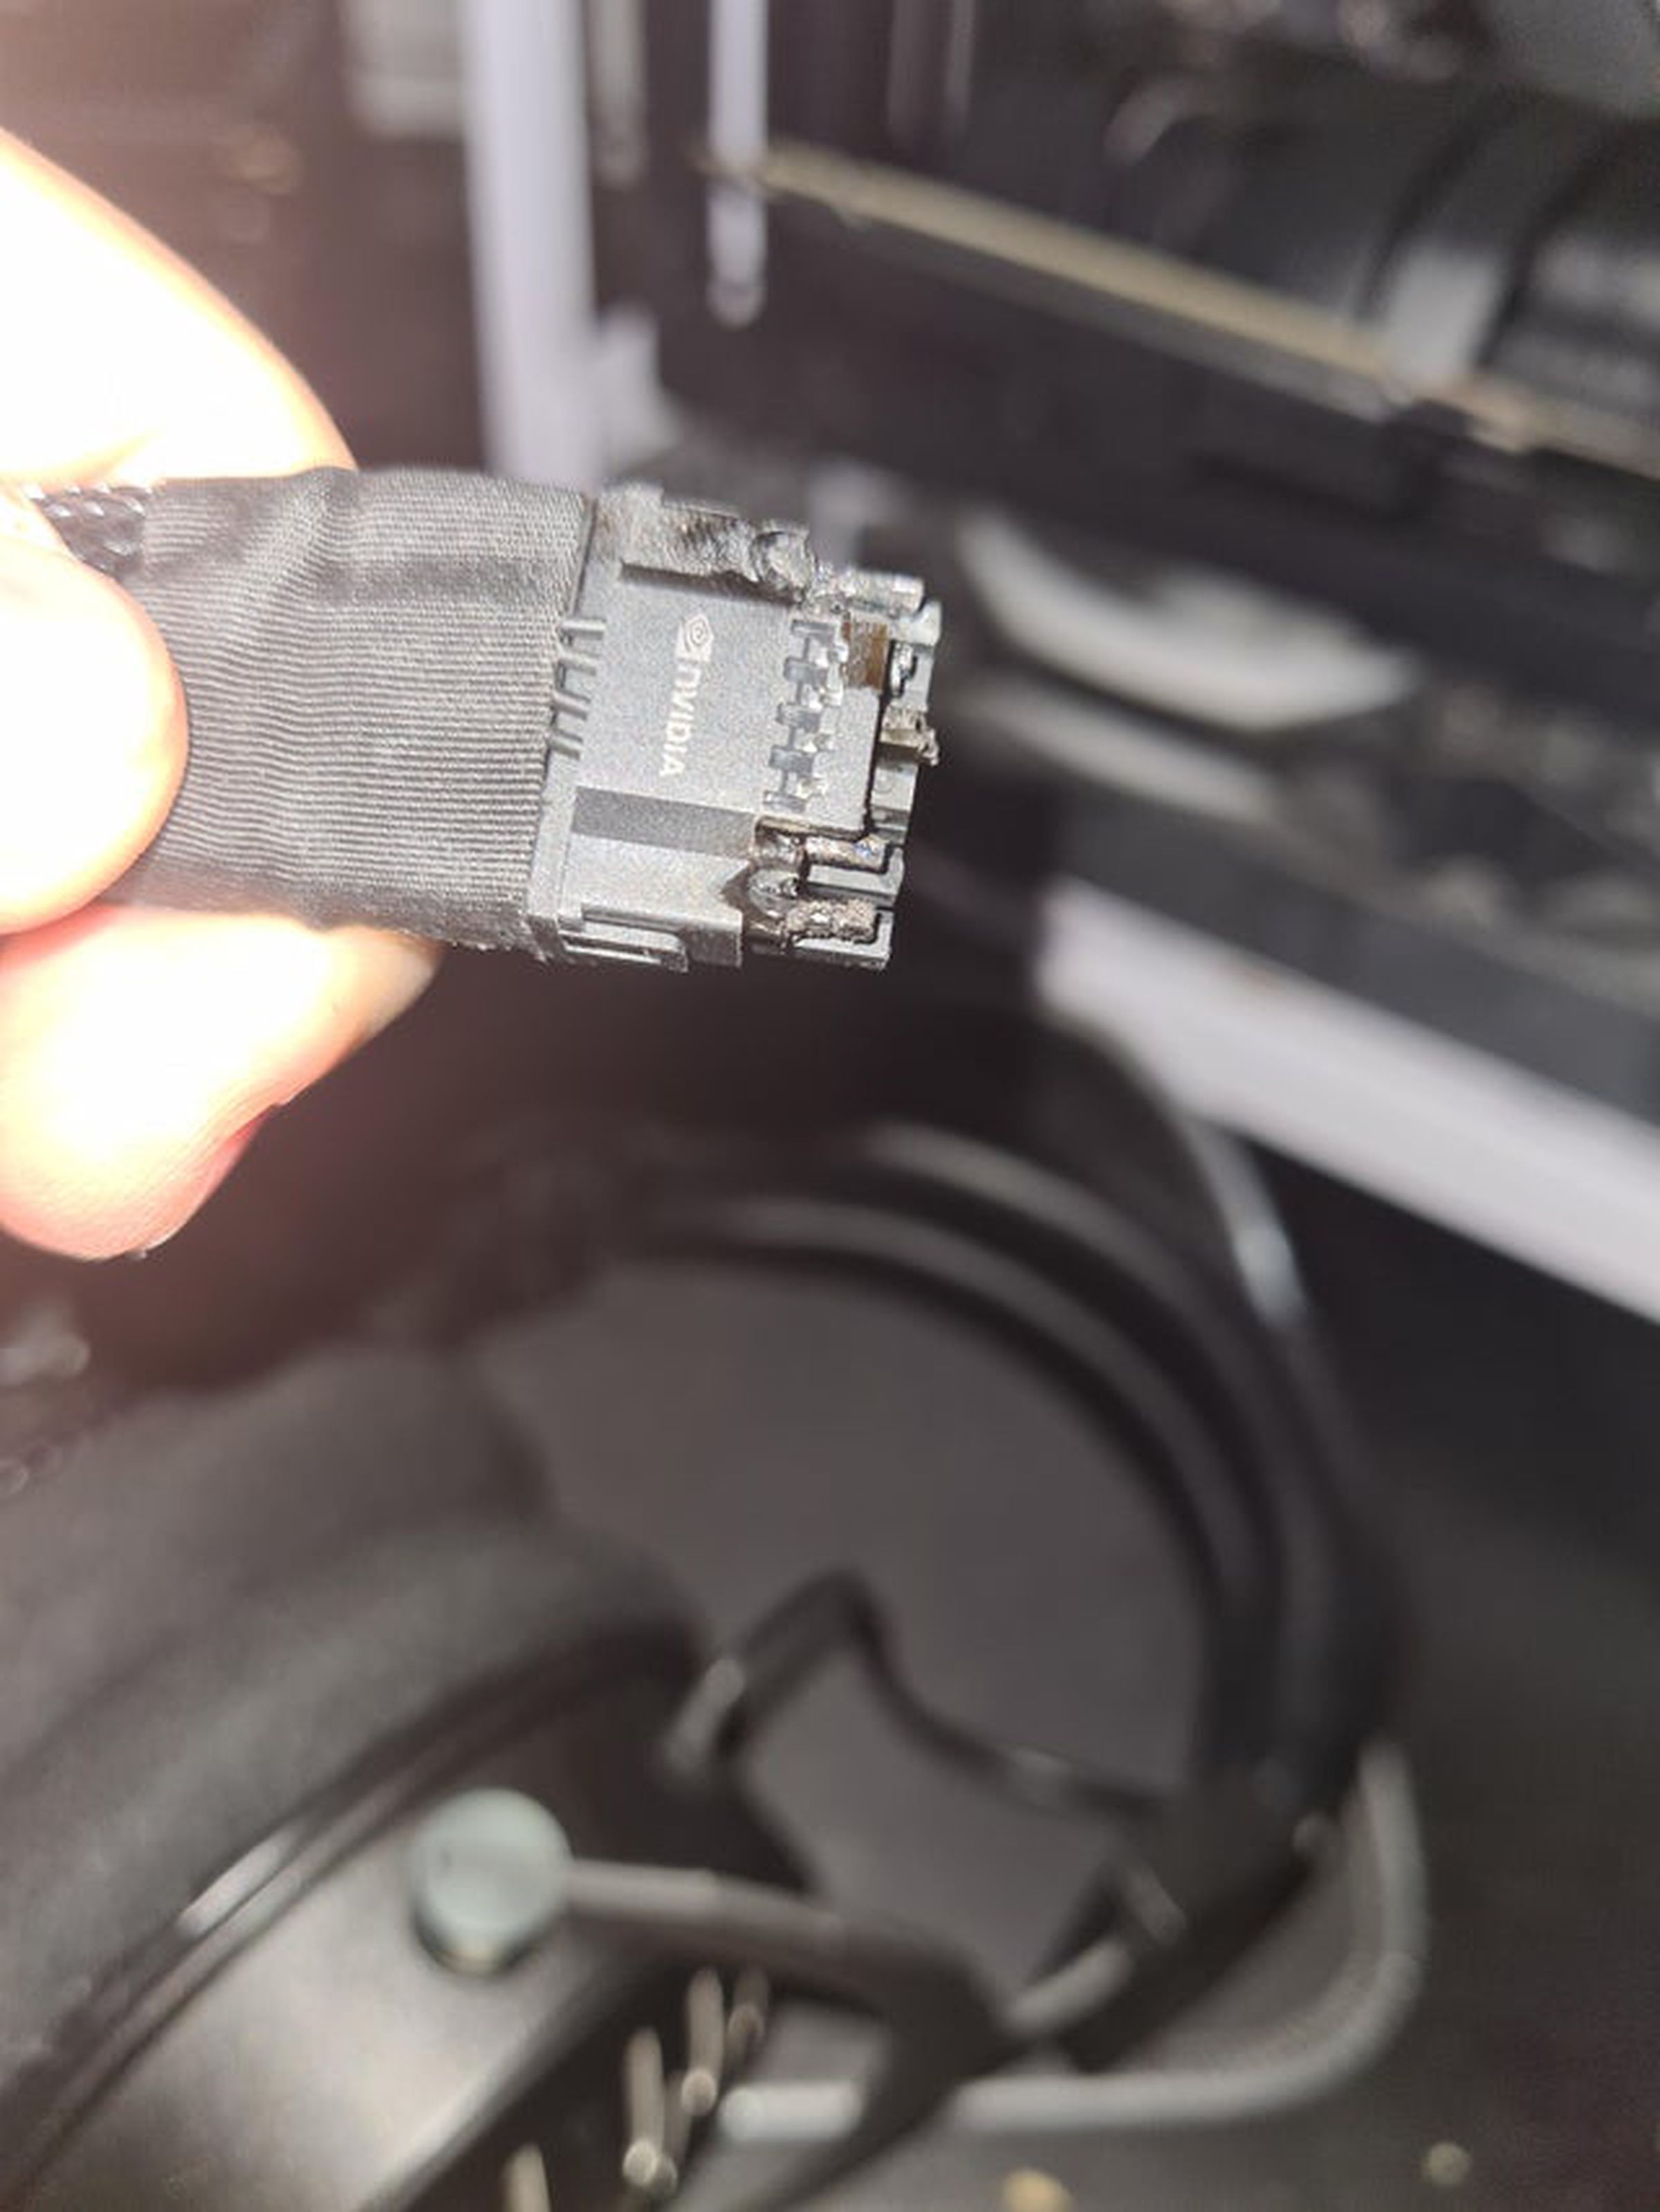 A melted RTX 4090 power connector.